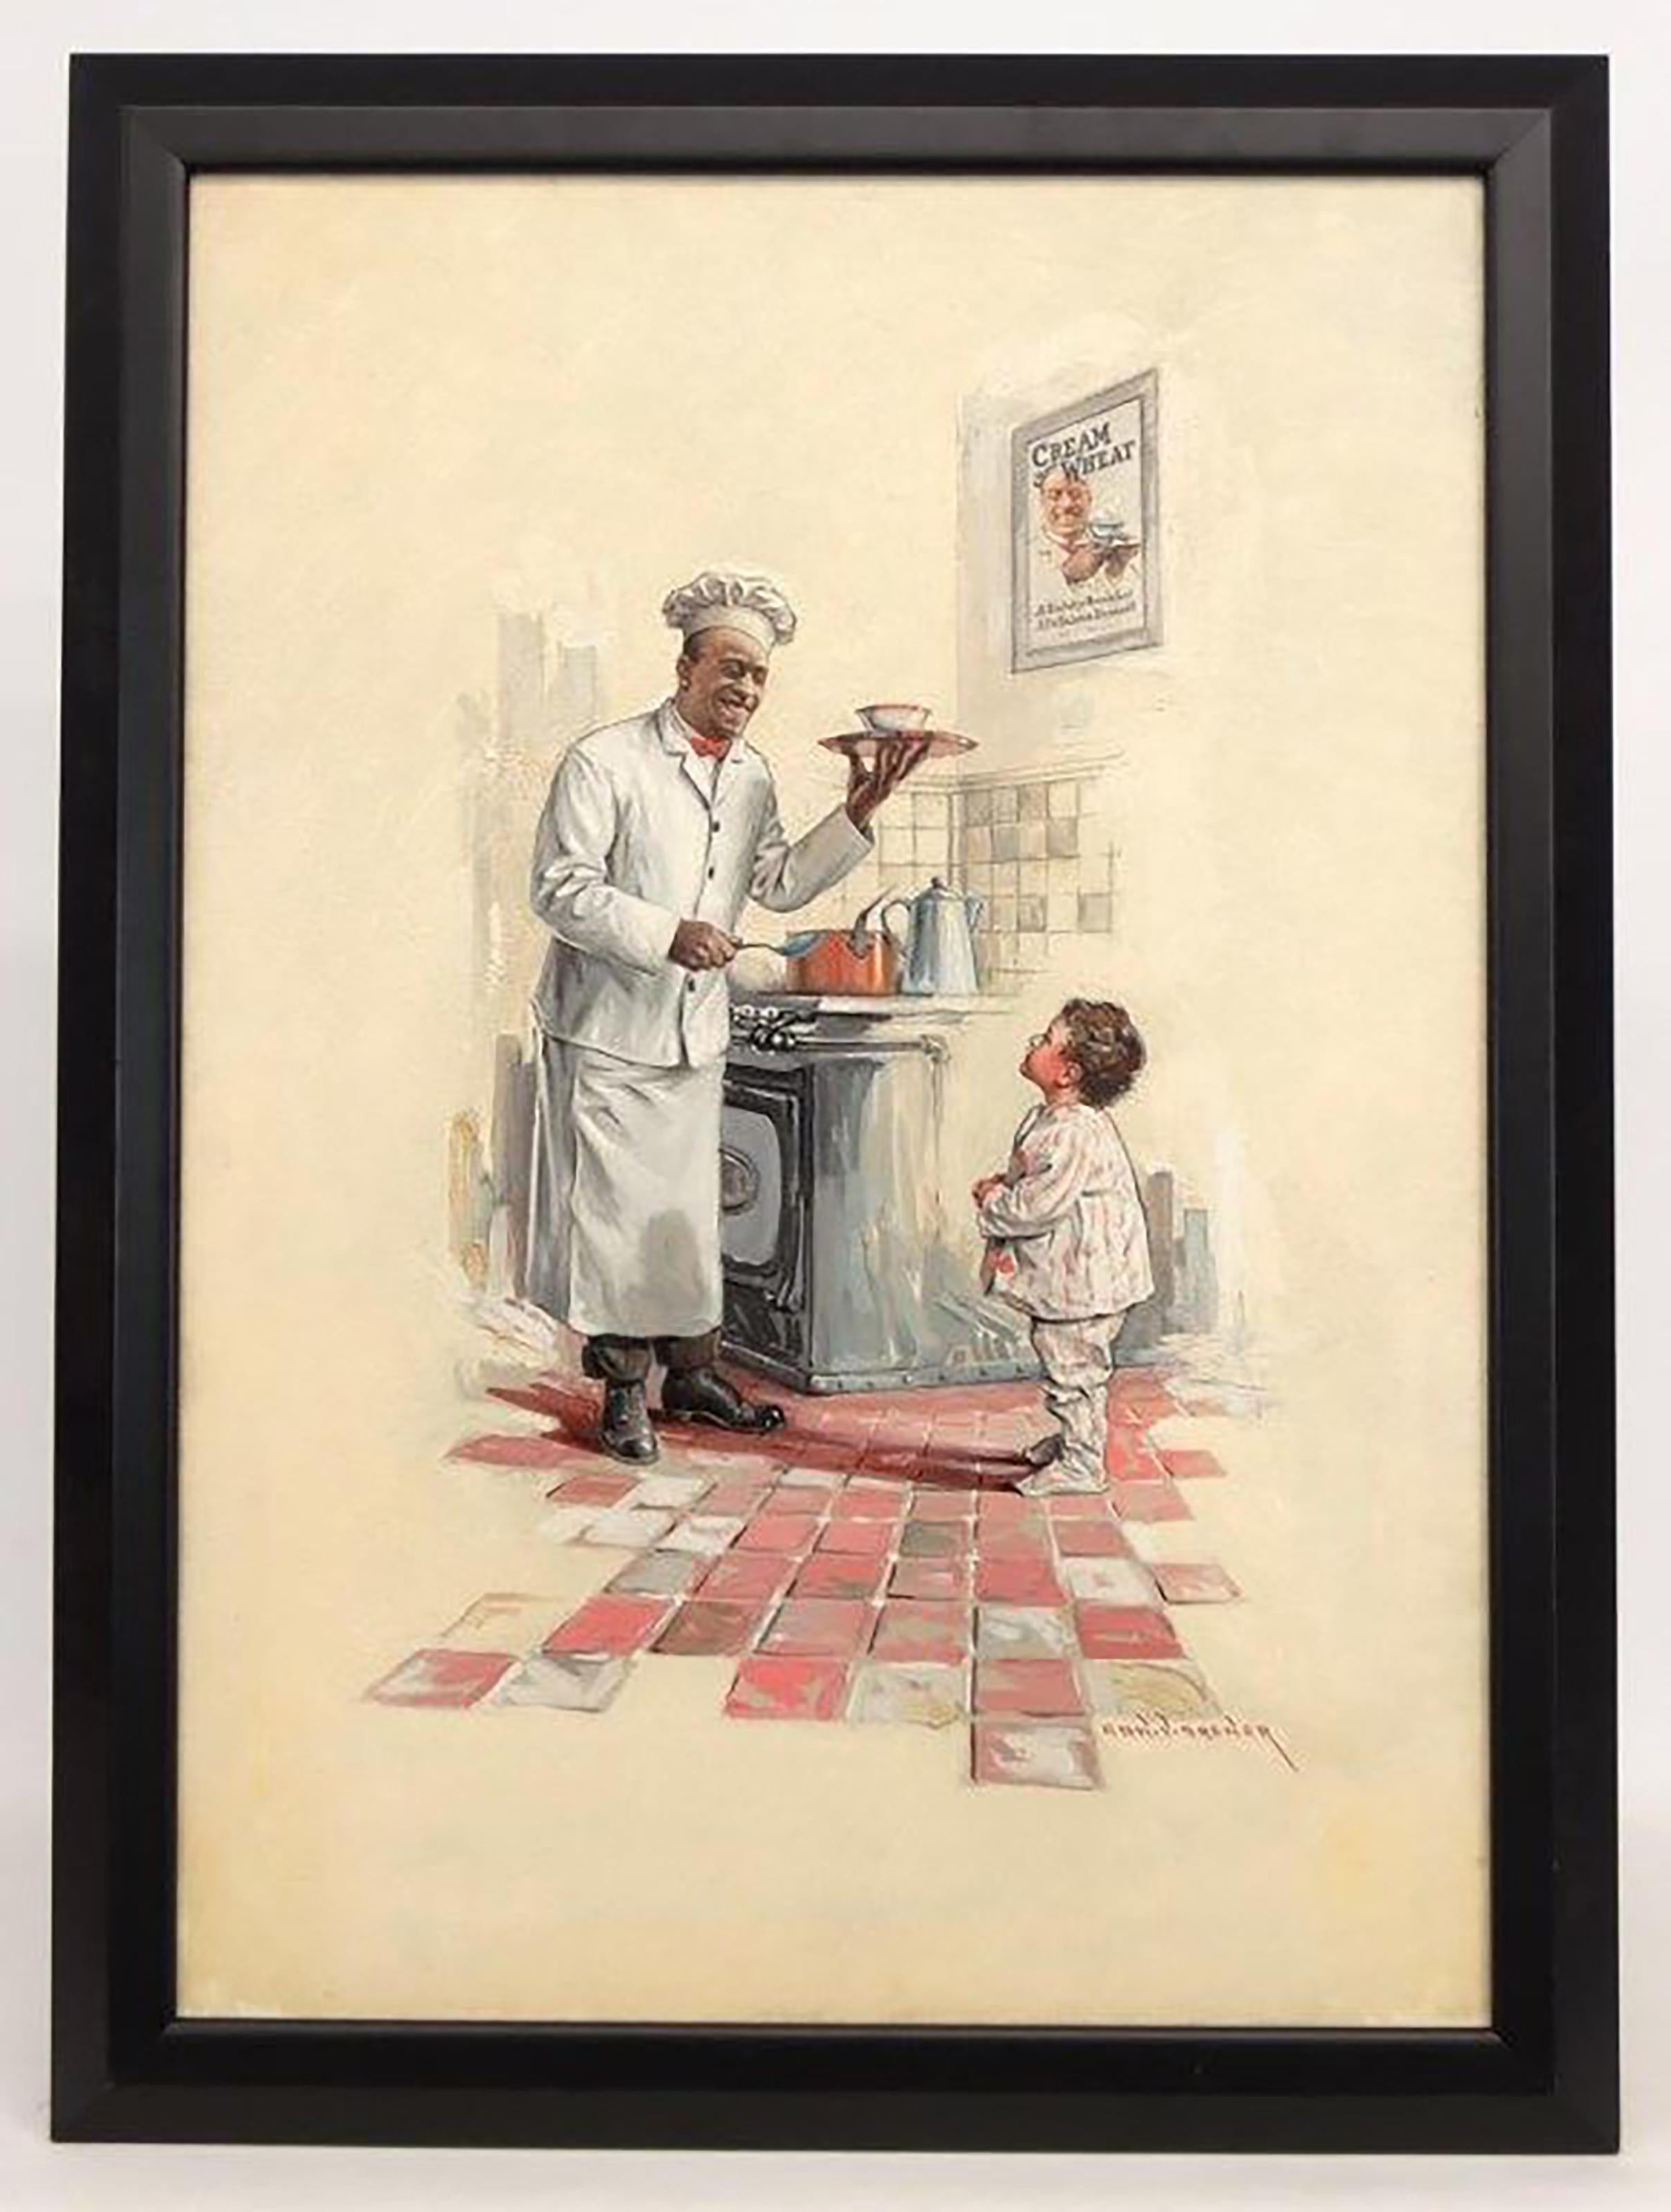 Cream of Wheat Advertisement - Painting by Edward Brewer